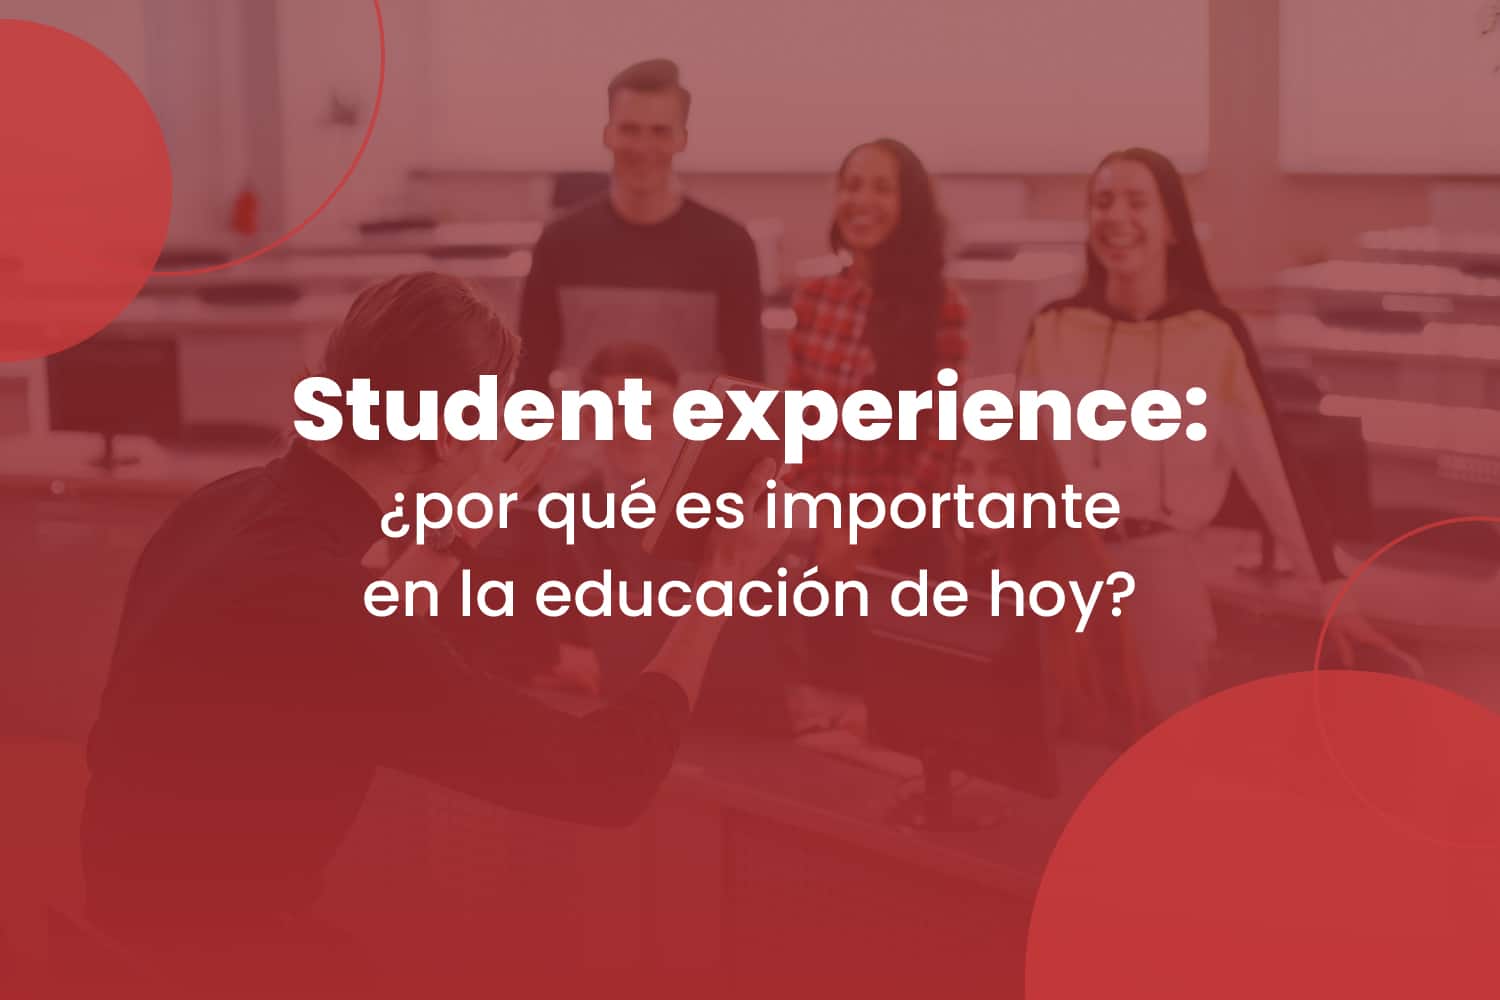 Student experience